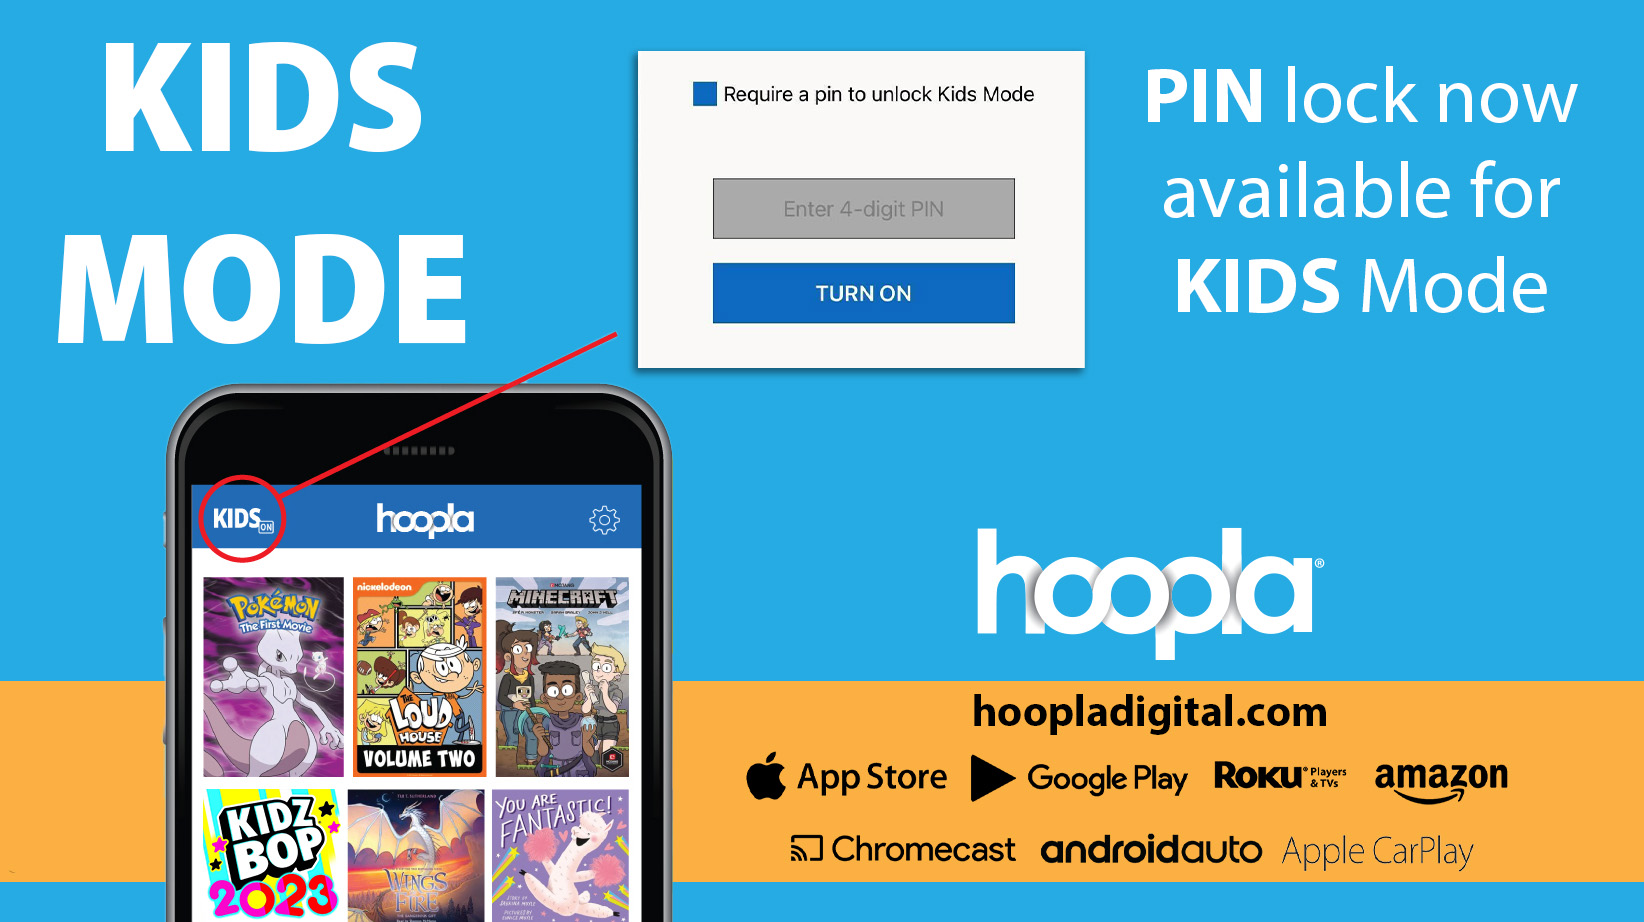 PIN Lock now available for Kids Mode